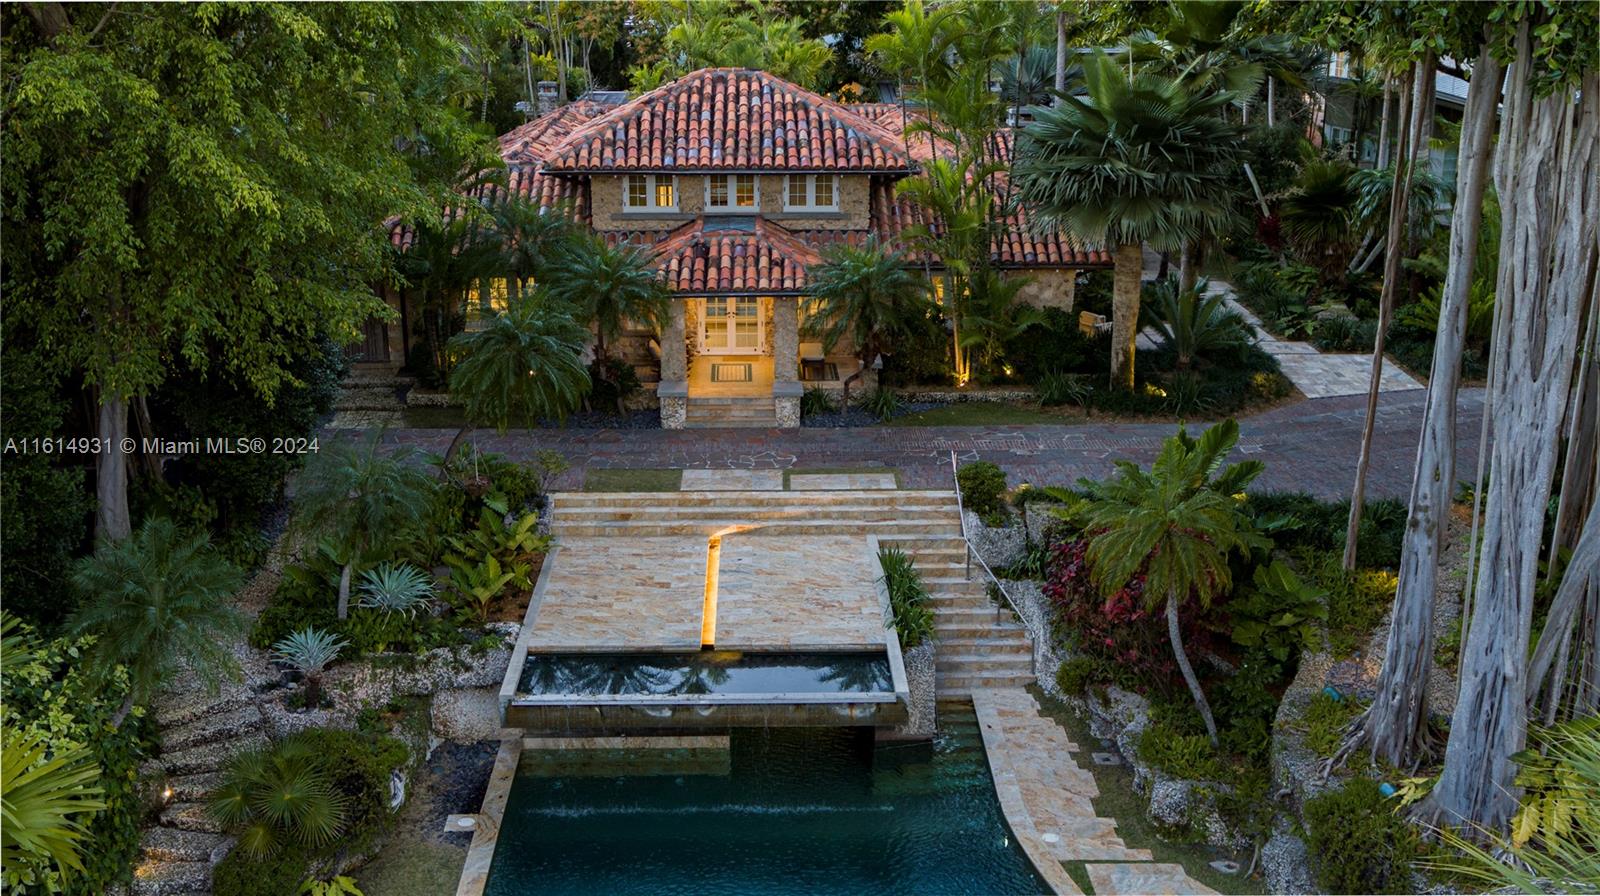 Once-in-a-Lifetime Opportunity. Introducing Banyan Ridge Estate in the heart of Coconut Grove. This mesmerizing multi-acre private gated haven tailored over 4.5 decades never before offered to the public. 2 parcels feature direct ocean views boasting 180’ of water-frontage. Banyan Ridge transports you to a transcendent oasis w/ meticulously landscaped grounds. 100-year-old Banyan Tree anchors the estate, flanked by cascading waterfalls, tropical saltwater fishpond, lap infinity pool, terraces overlooking the bay & the finest blend of amenities reminiscent of the most elite world-class resorts. Escape to the tranquility of meditation gardens as every corner of this property is an architectural masterpiece waiting to be experienced. Estate is being sold together with 7 additional parcels.